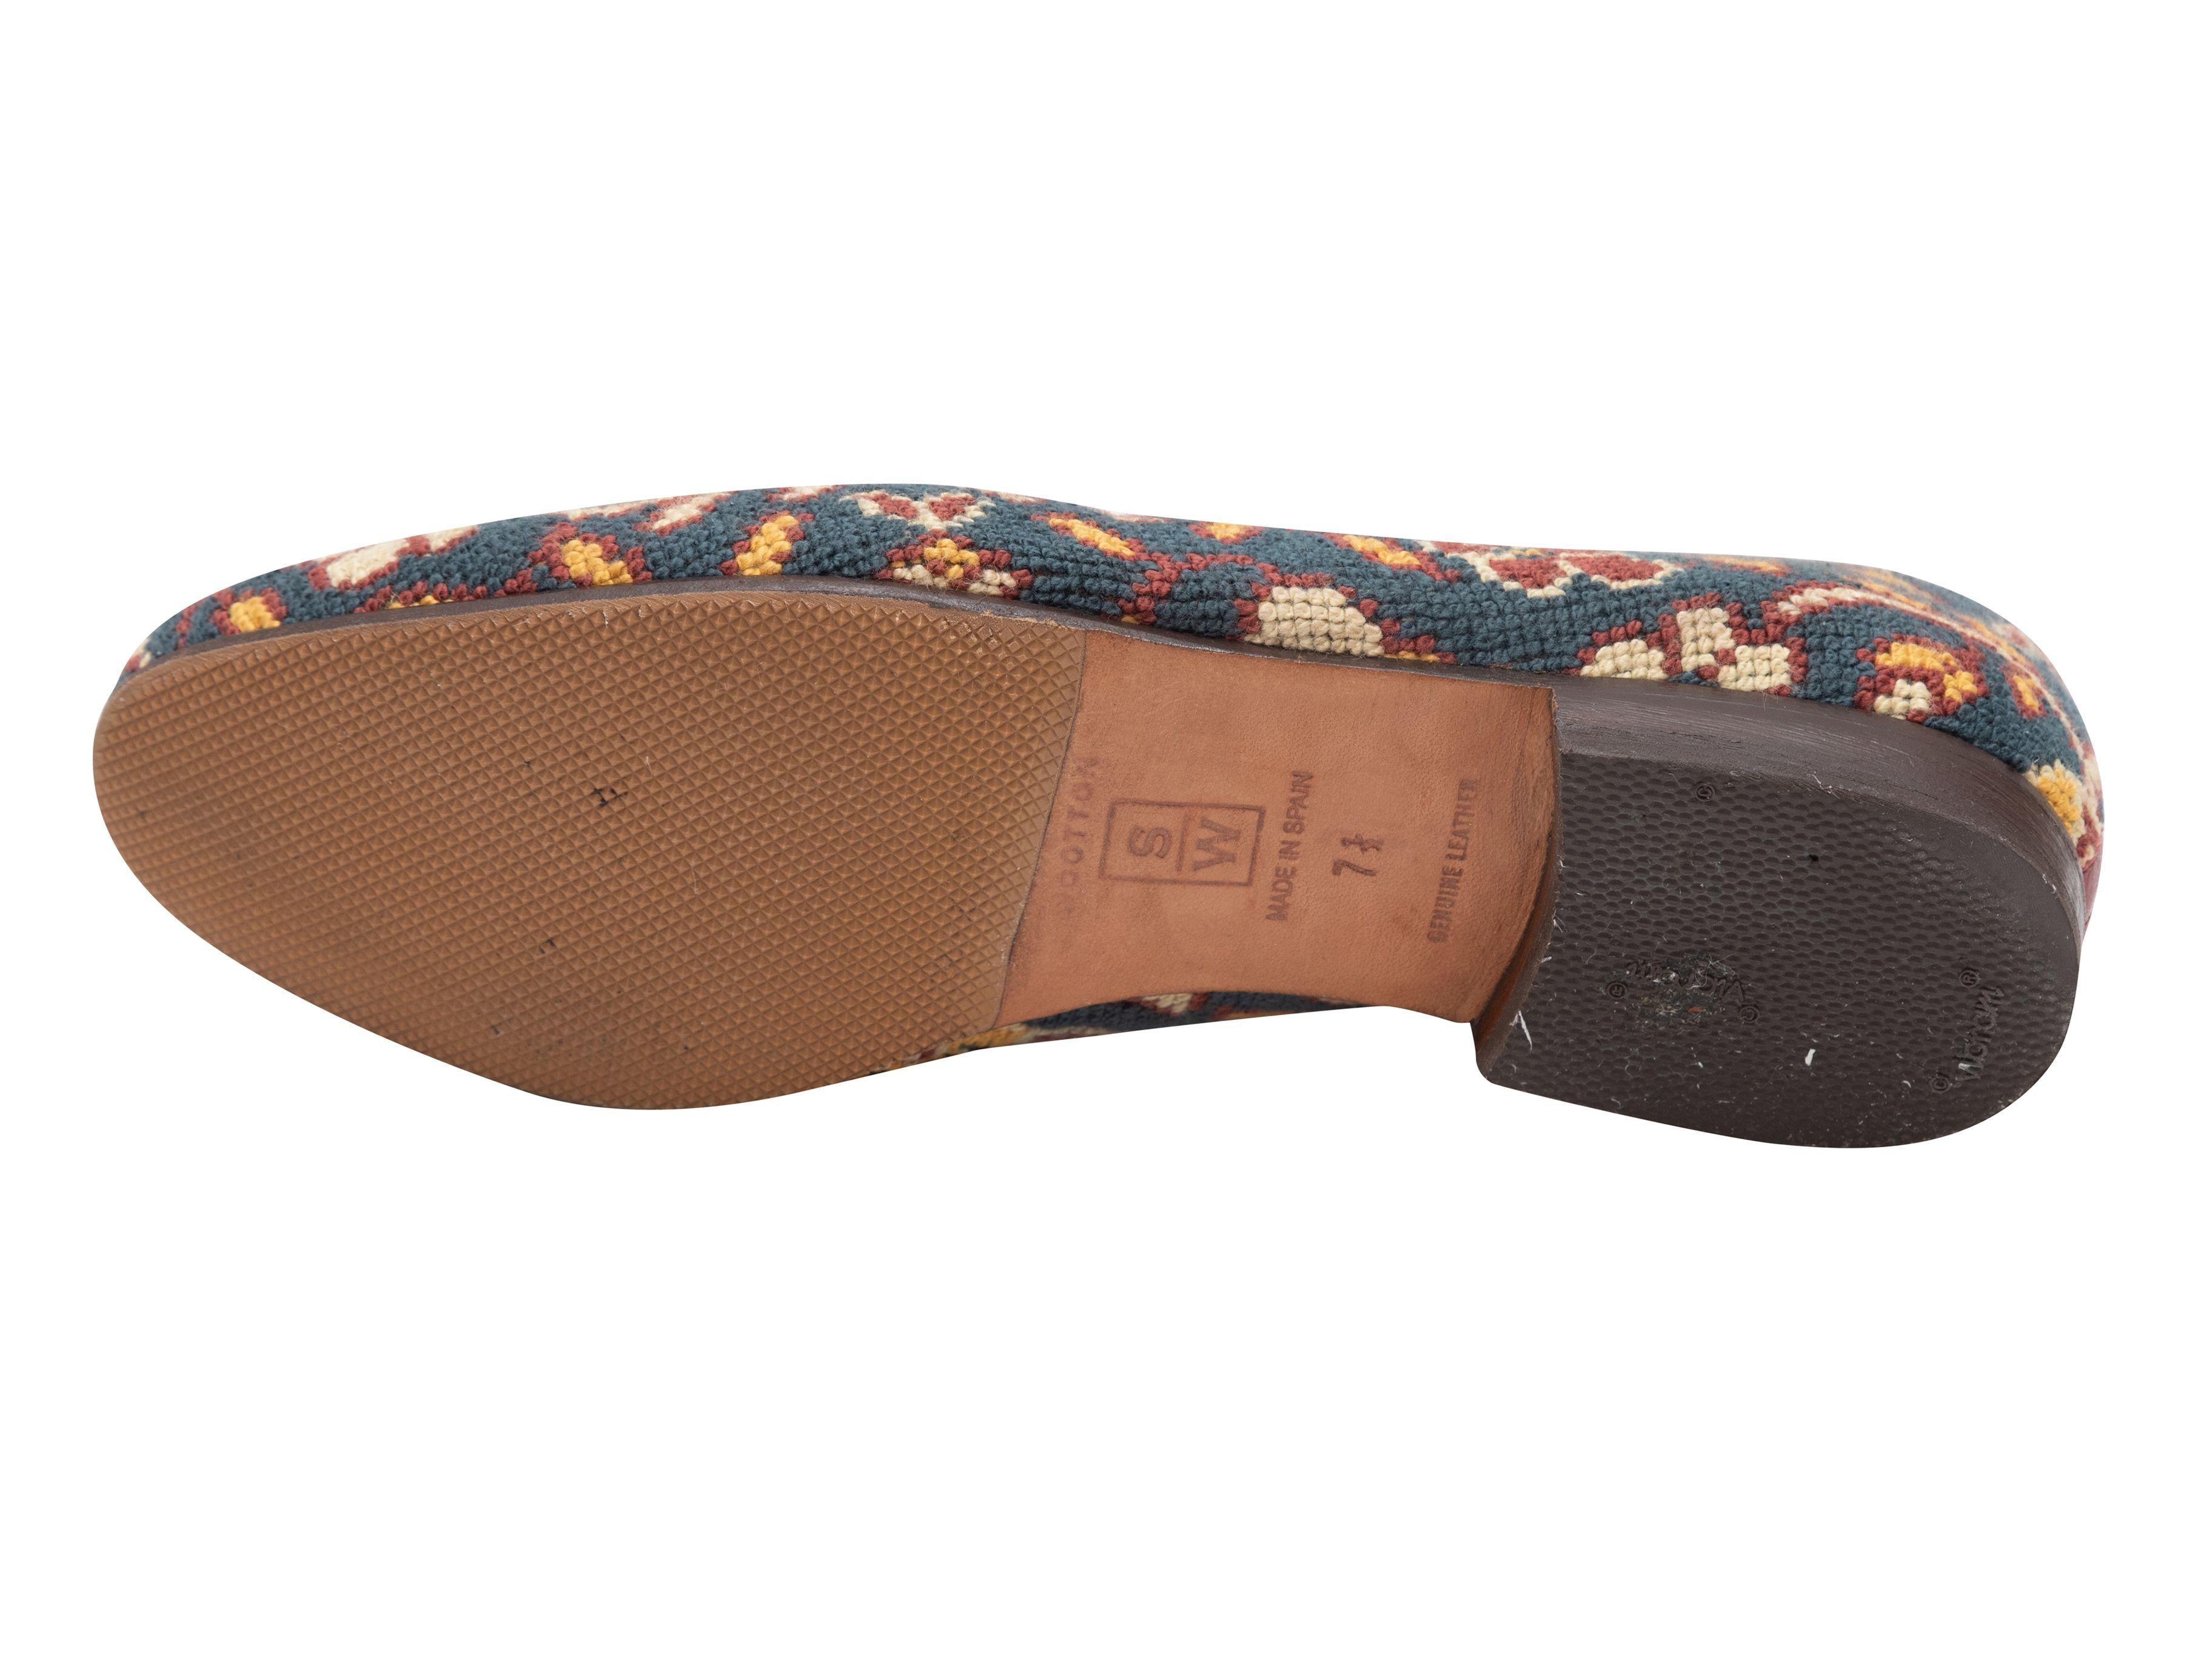 Product Details: Blue and multicolor patterned needlepoint loafers by Stubbs & Wootton. Leather trim throughout. 0.75